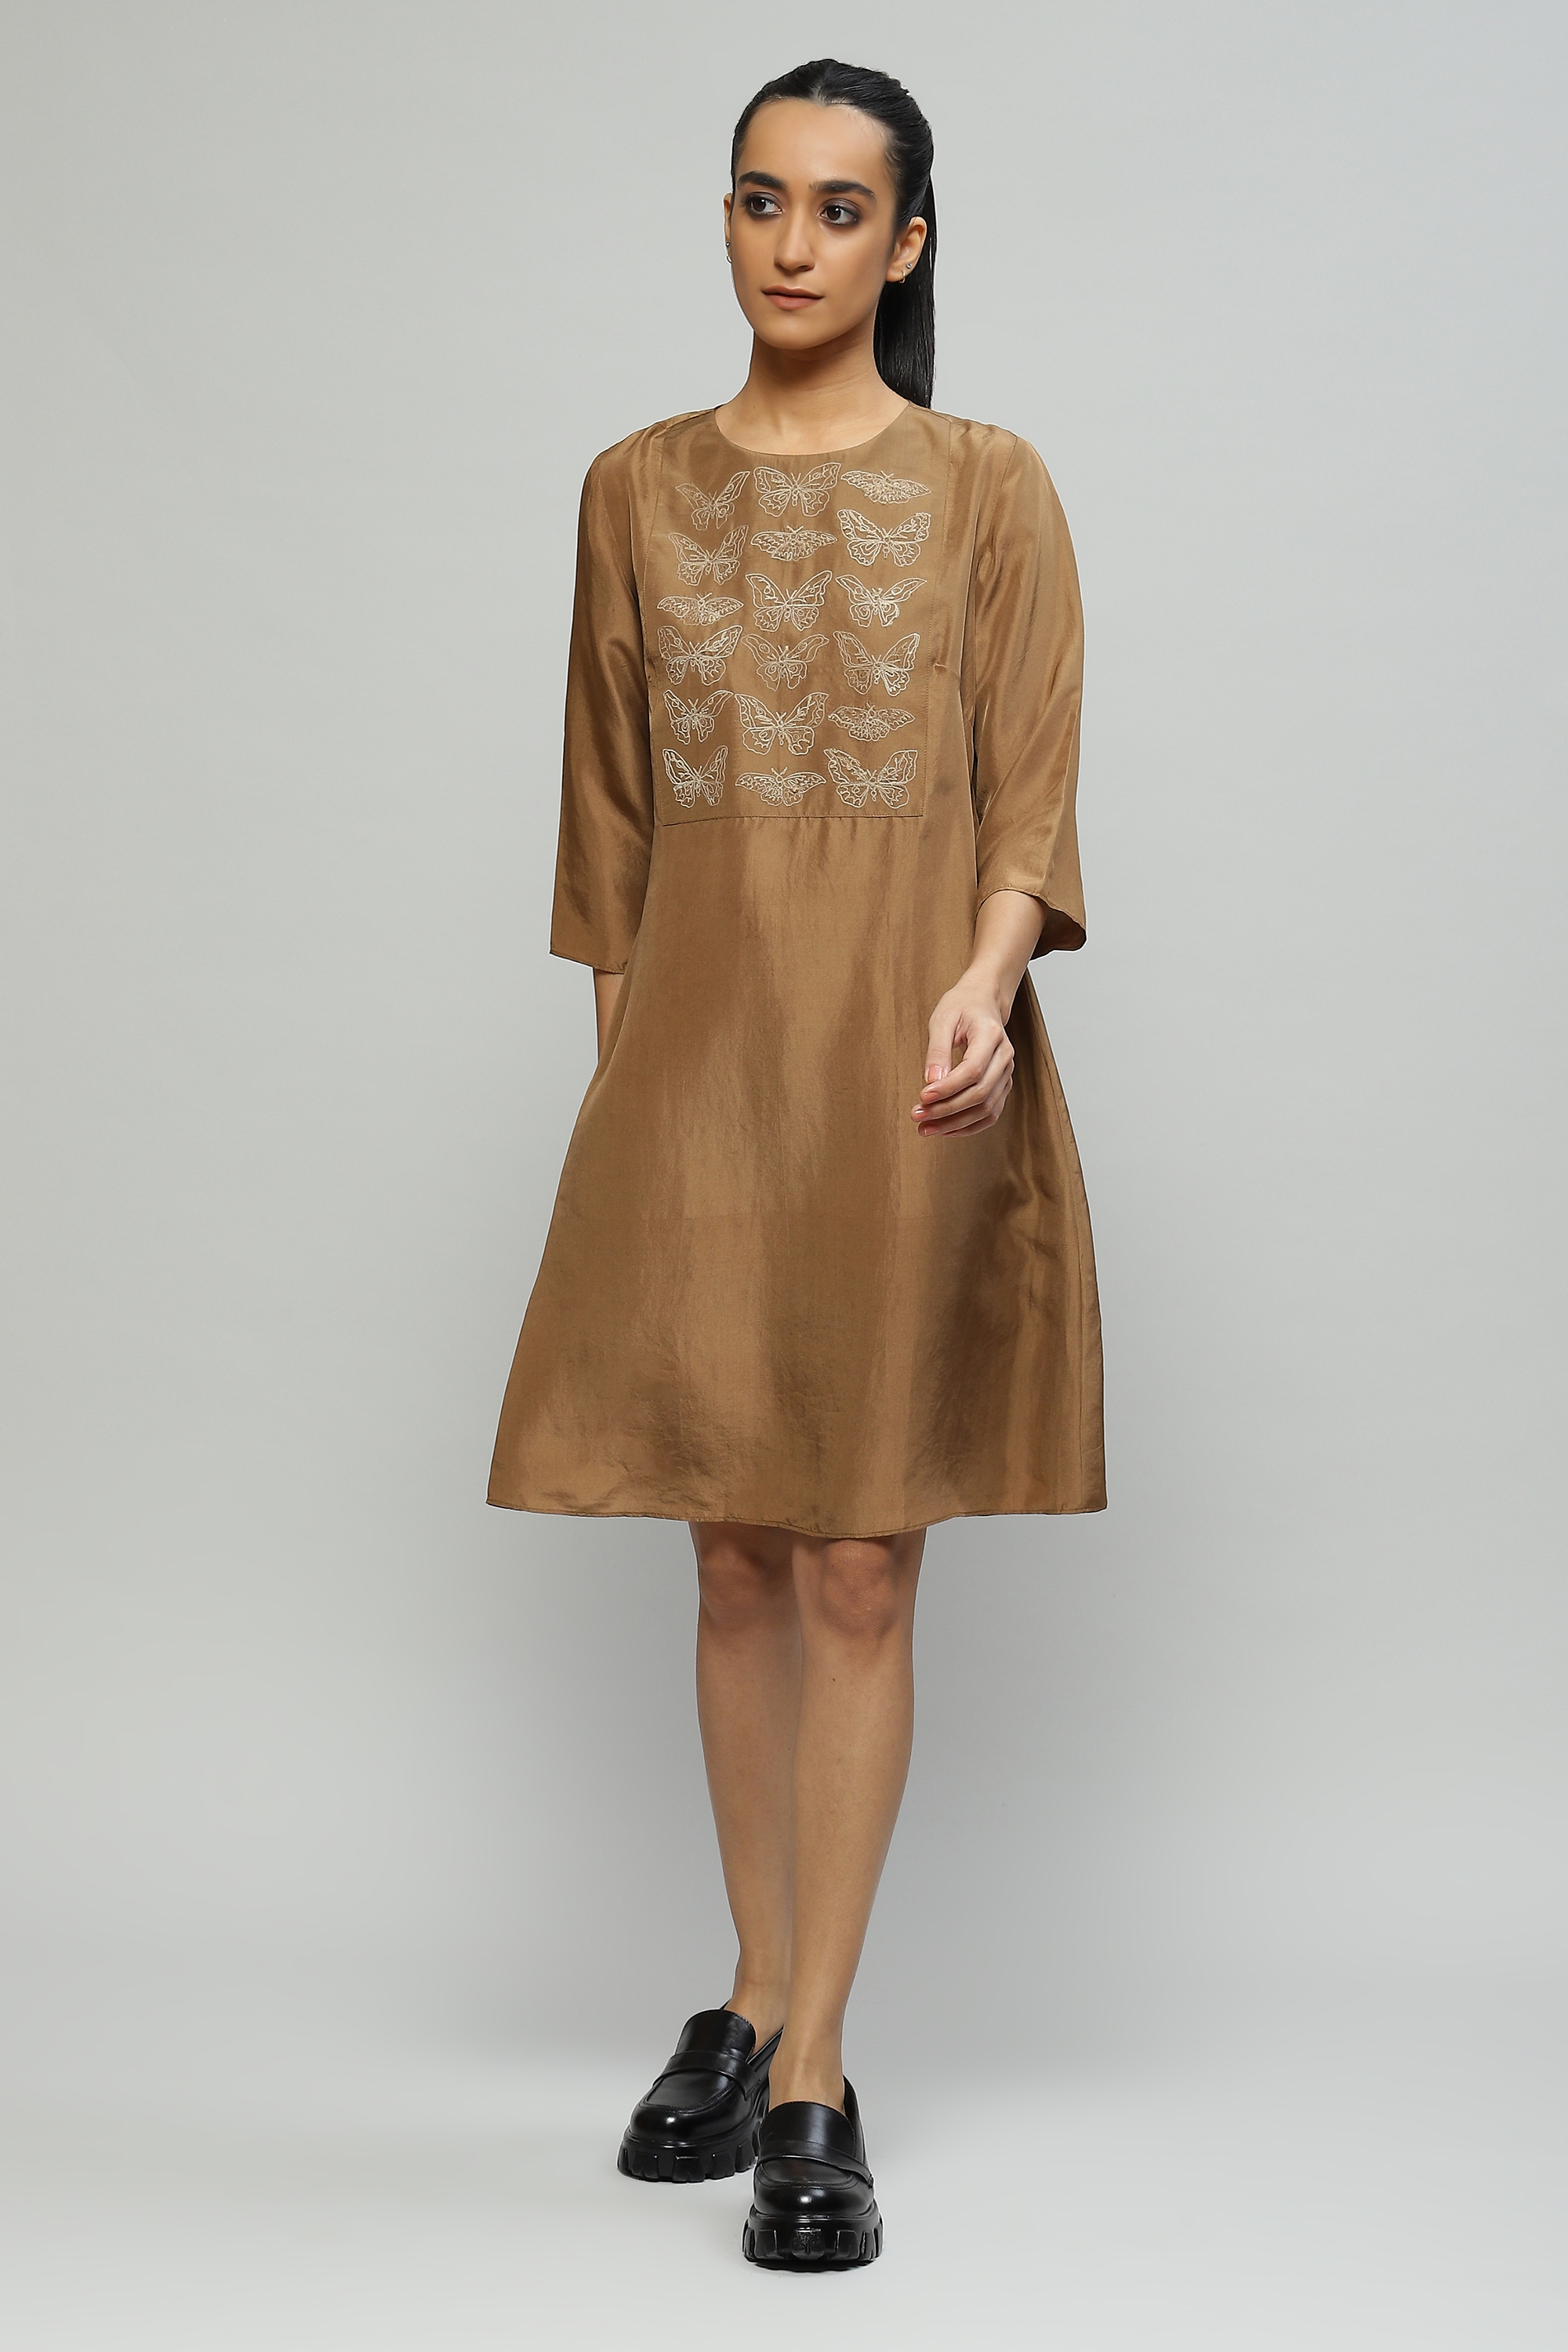 ABRAHAM AND THAKORE | Tussar Embroidered Silk Dress